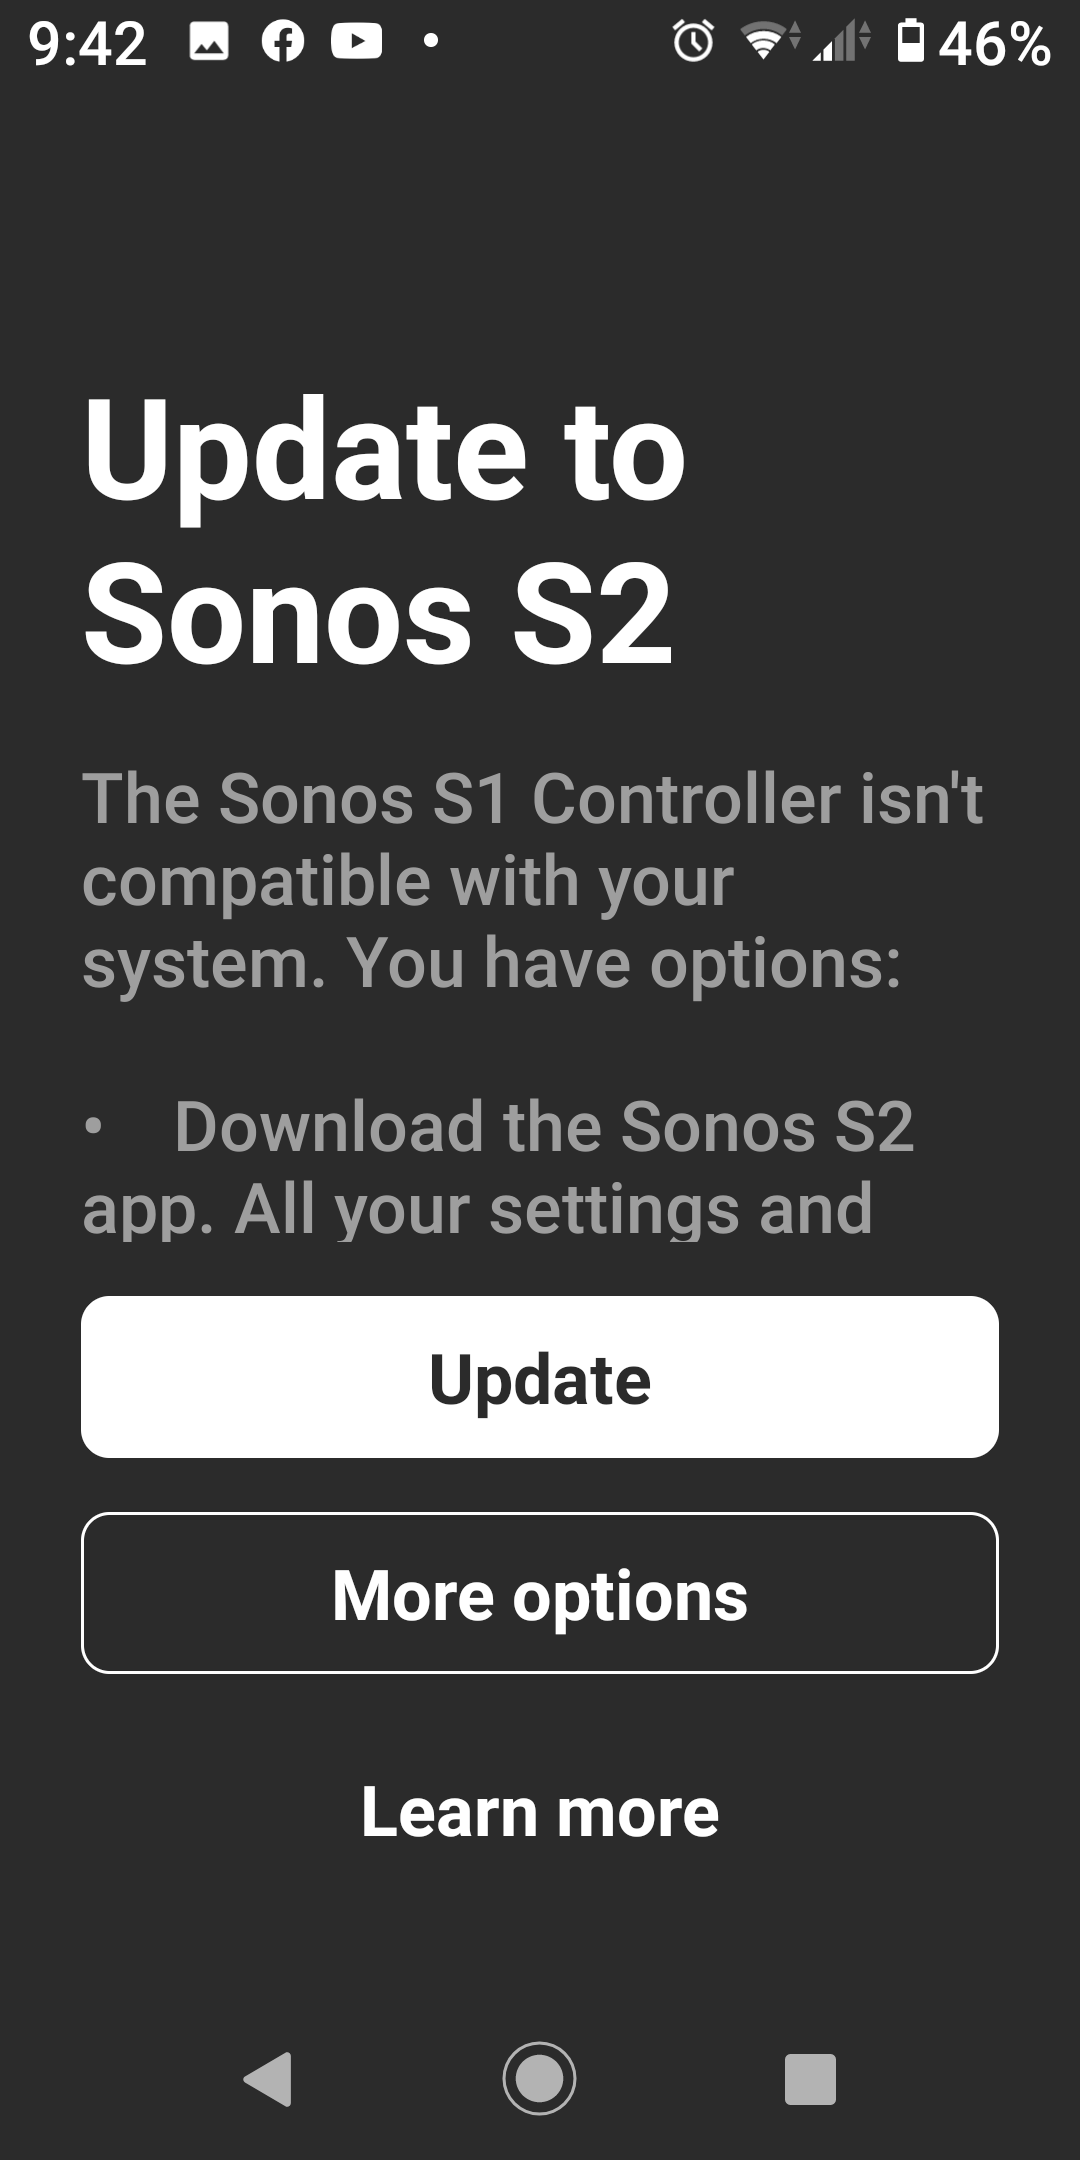 mistet hjerte Syge person Mordrin How to stop S1 to S2 update | Sonos Community